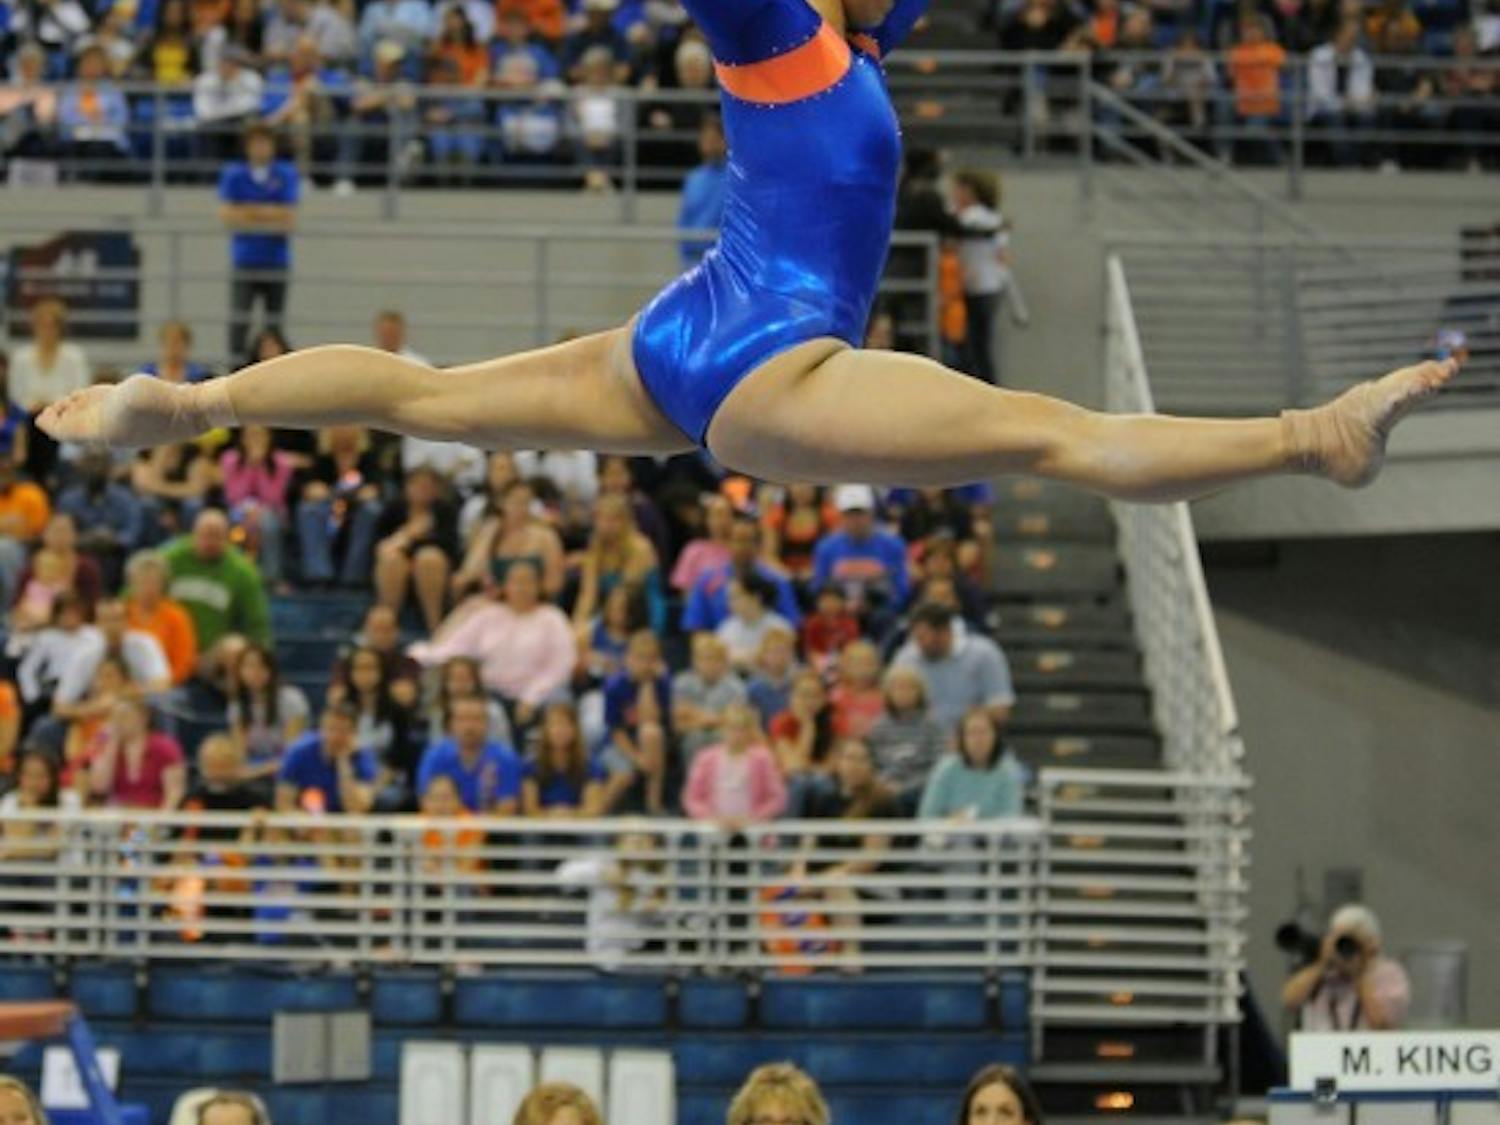 Florida junior gymnast Marissa King said the Gators are not concentrating on their newfound No. 1 ranking, instead choosing to use that as motivation to continue improving.